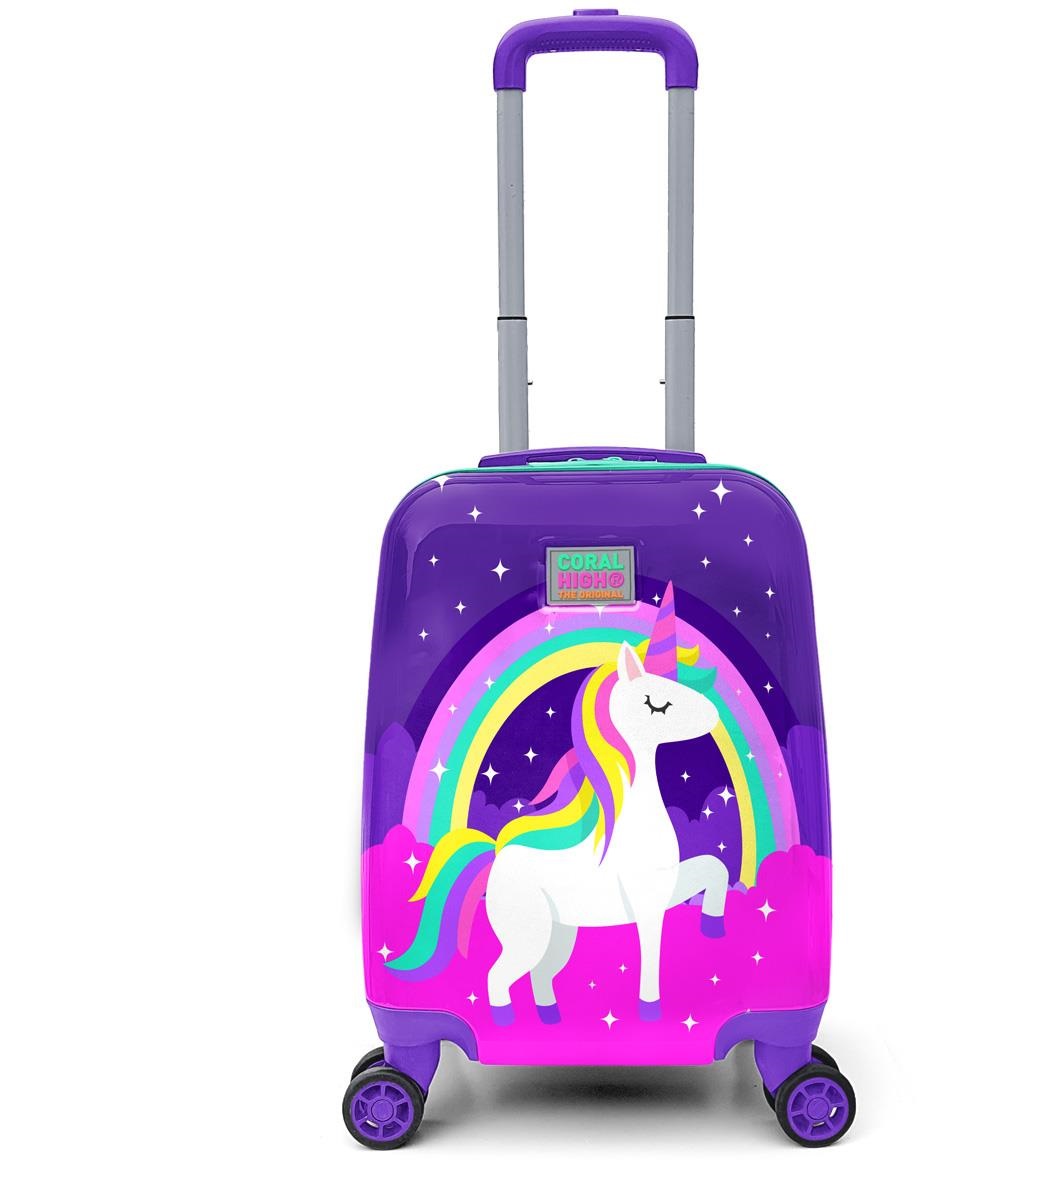 Coral High Kids Luggage suitcase - Purple Water Green Unicorn Patterned